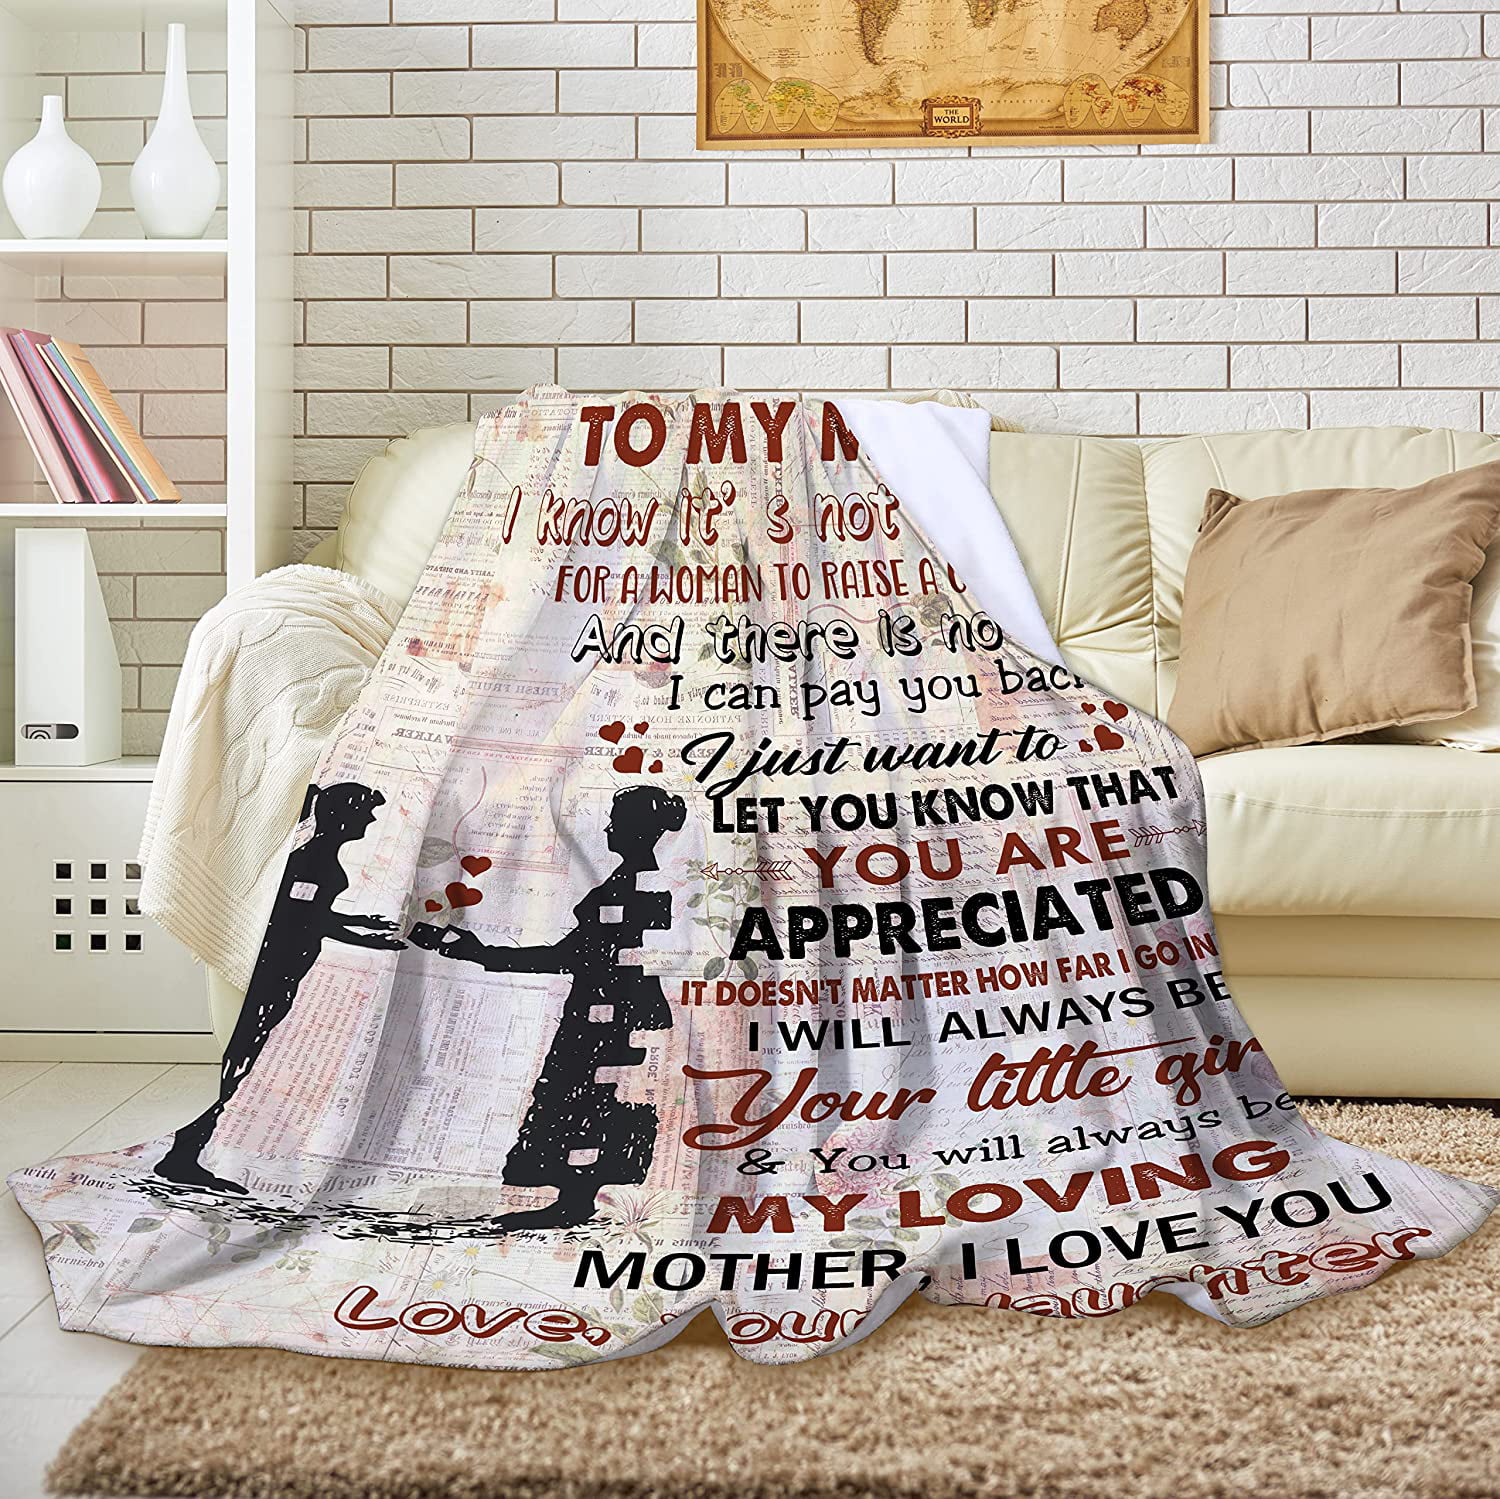  Personalized to My Mom Blanket from Daughter Son Love Letter  Mail to Mom Birthday Mothers Day Christmas Customized Fleece Sherpa Blanket  : Home & Kitchen